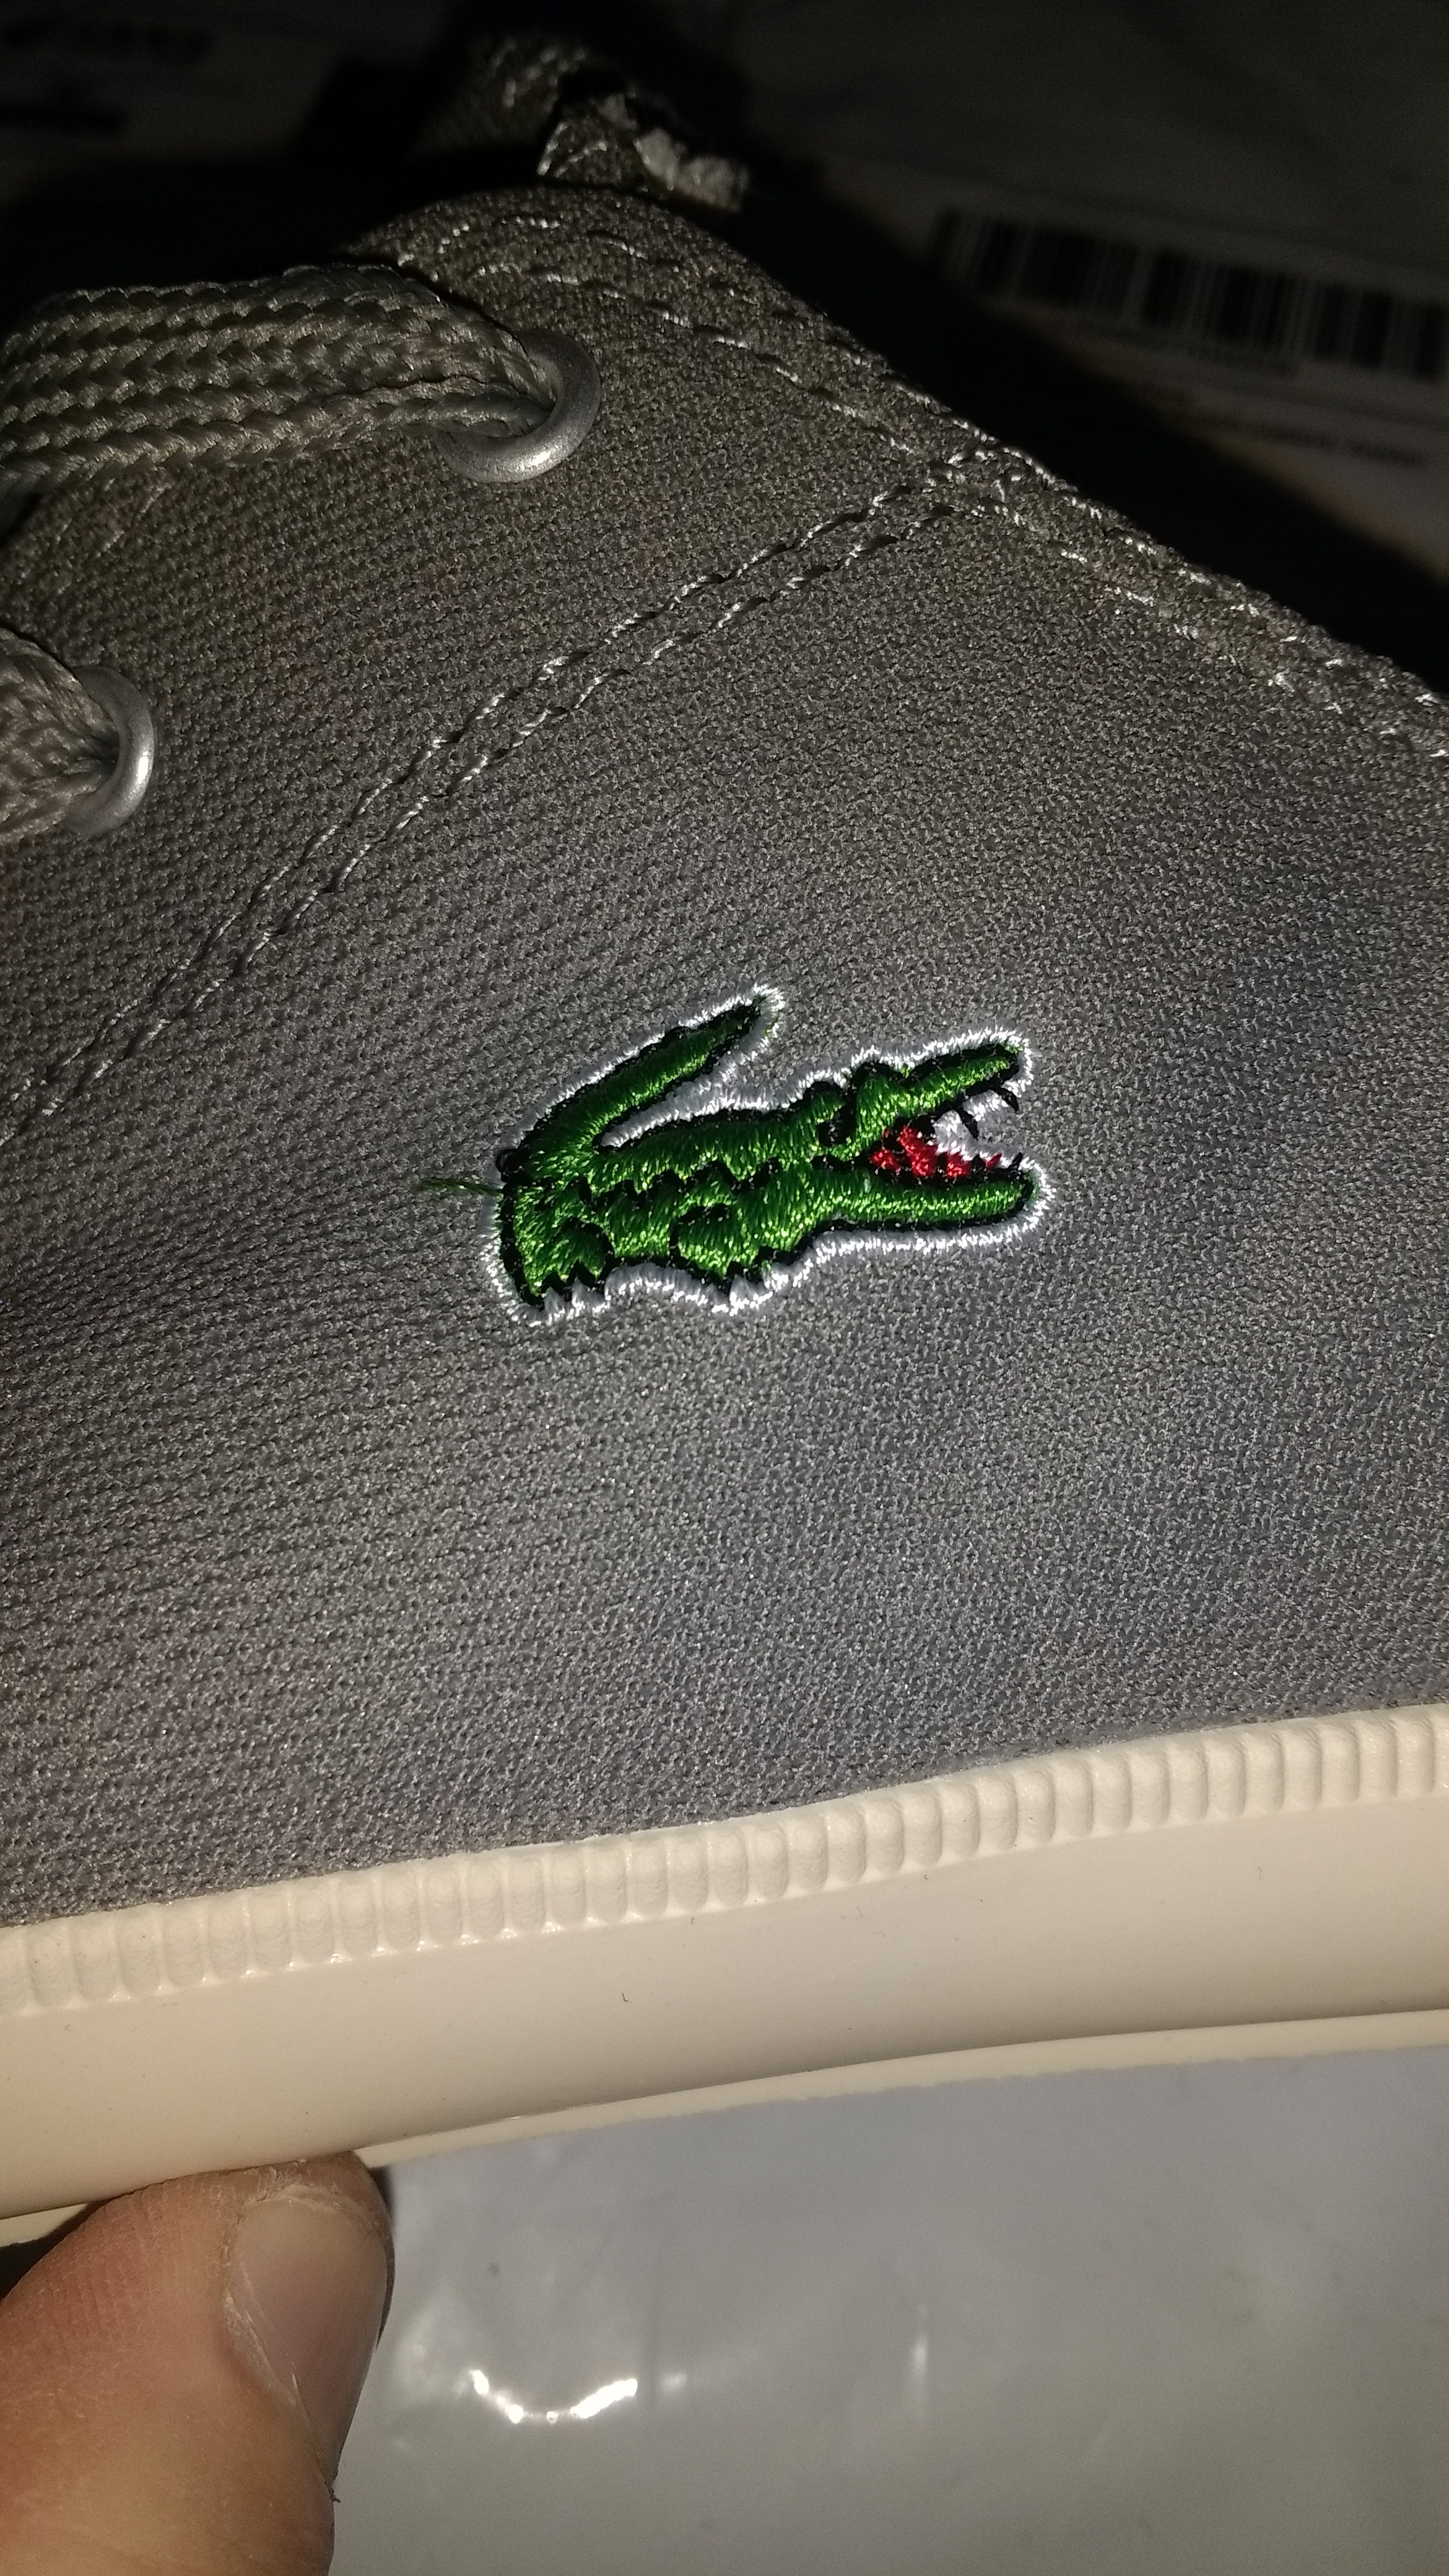 Fake Lacoste shoes |